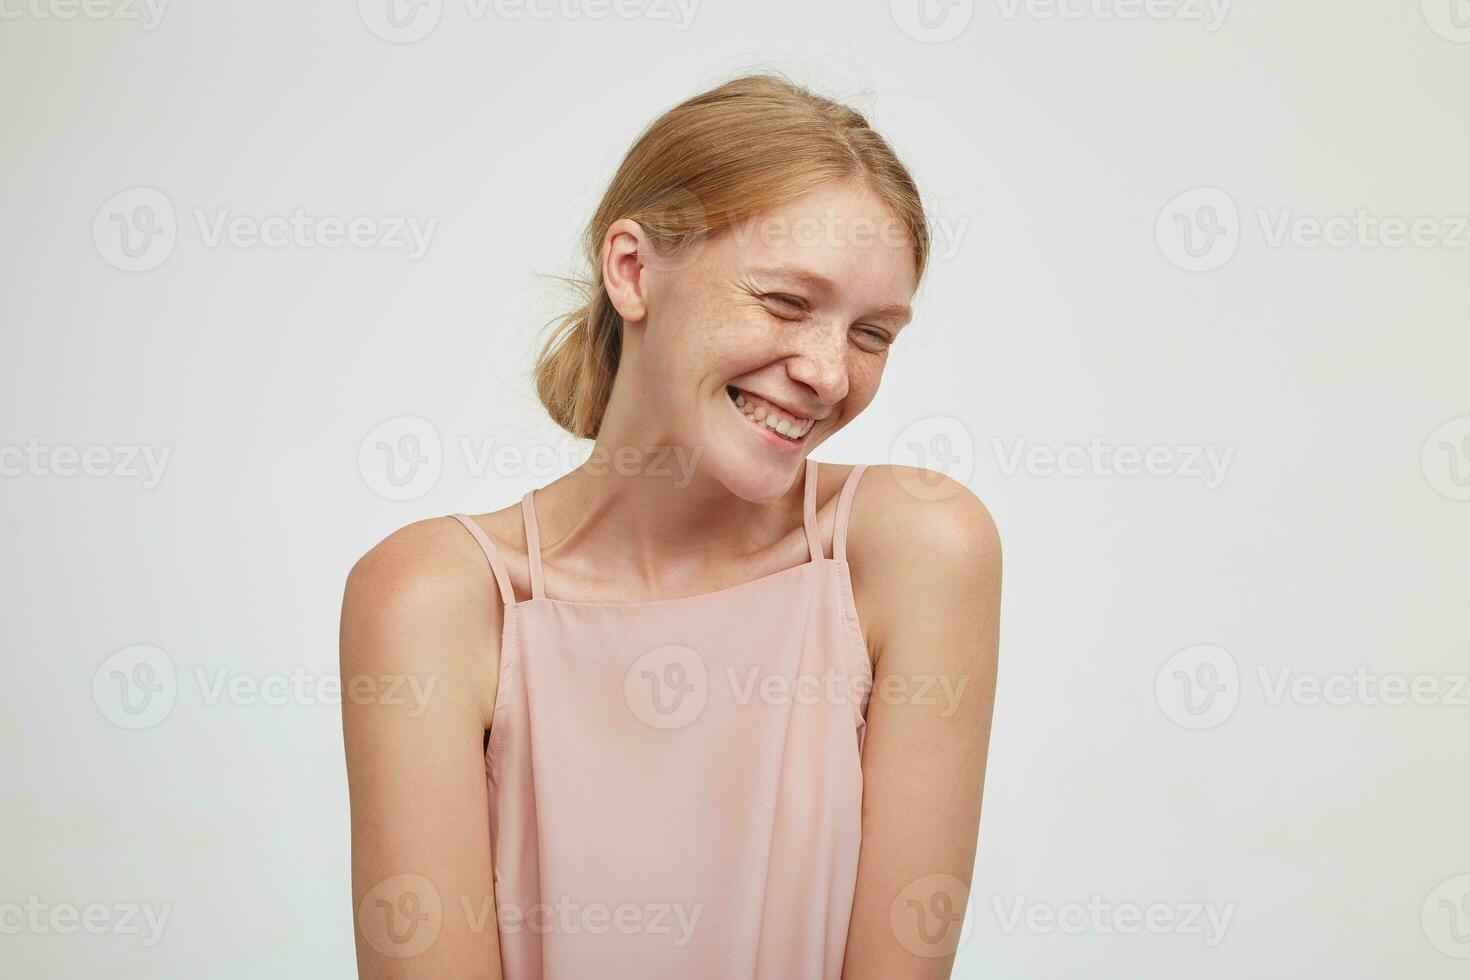 Pleased young beautiful redhead female dressed in pink shirt being in nice mood and smiling cheerfully, keeping her hands down while posing over white background photo